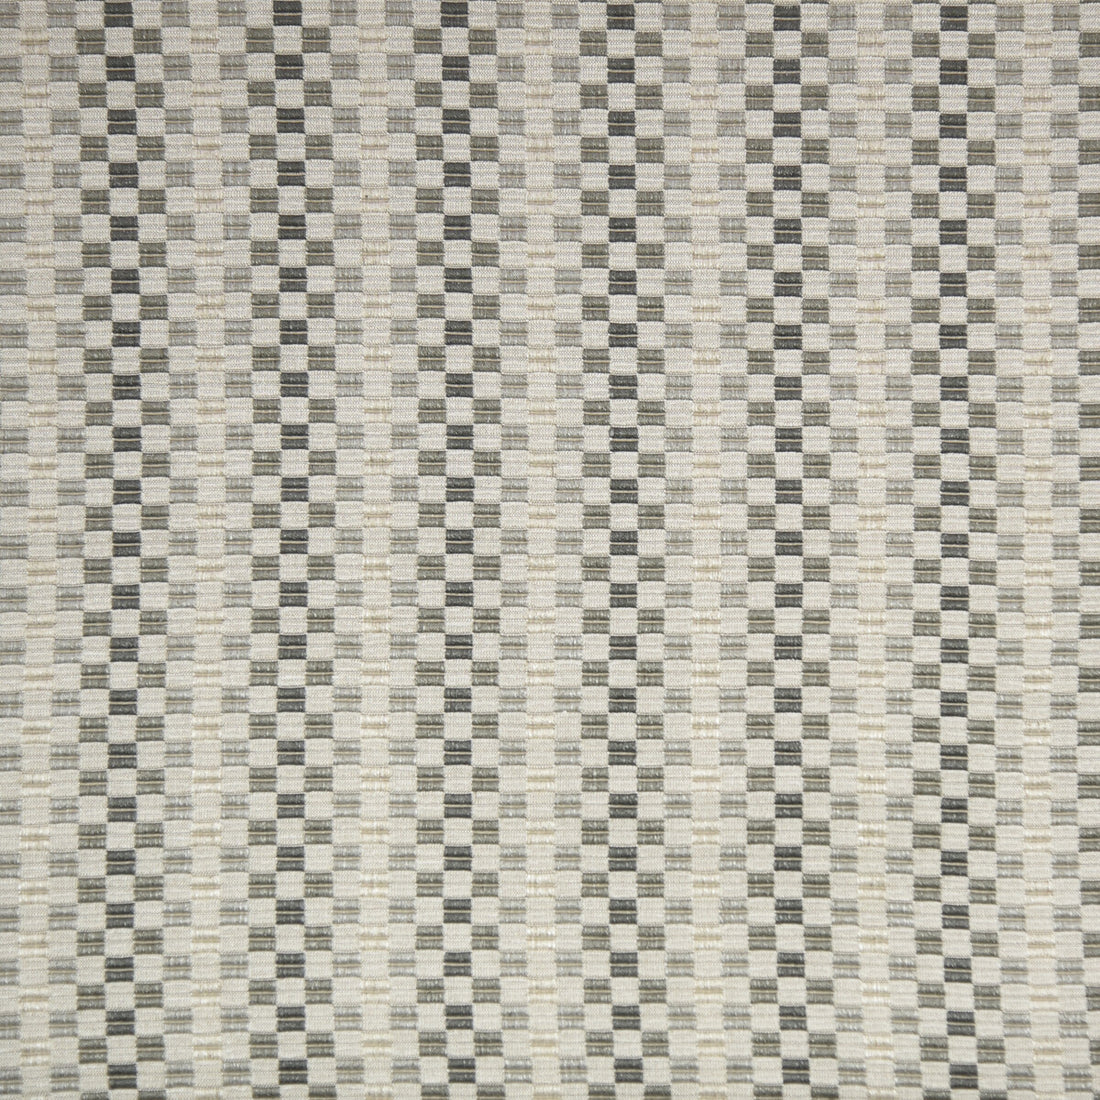 Vernazza fabric in pewter color - pattern 35766.106.0 - by Kravet Couture in the Modern Colors-Sojourn Collection collection